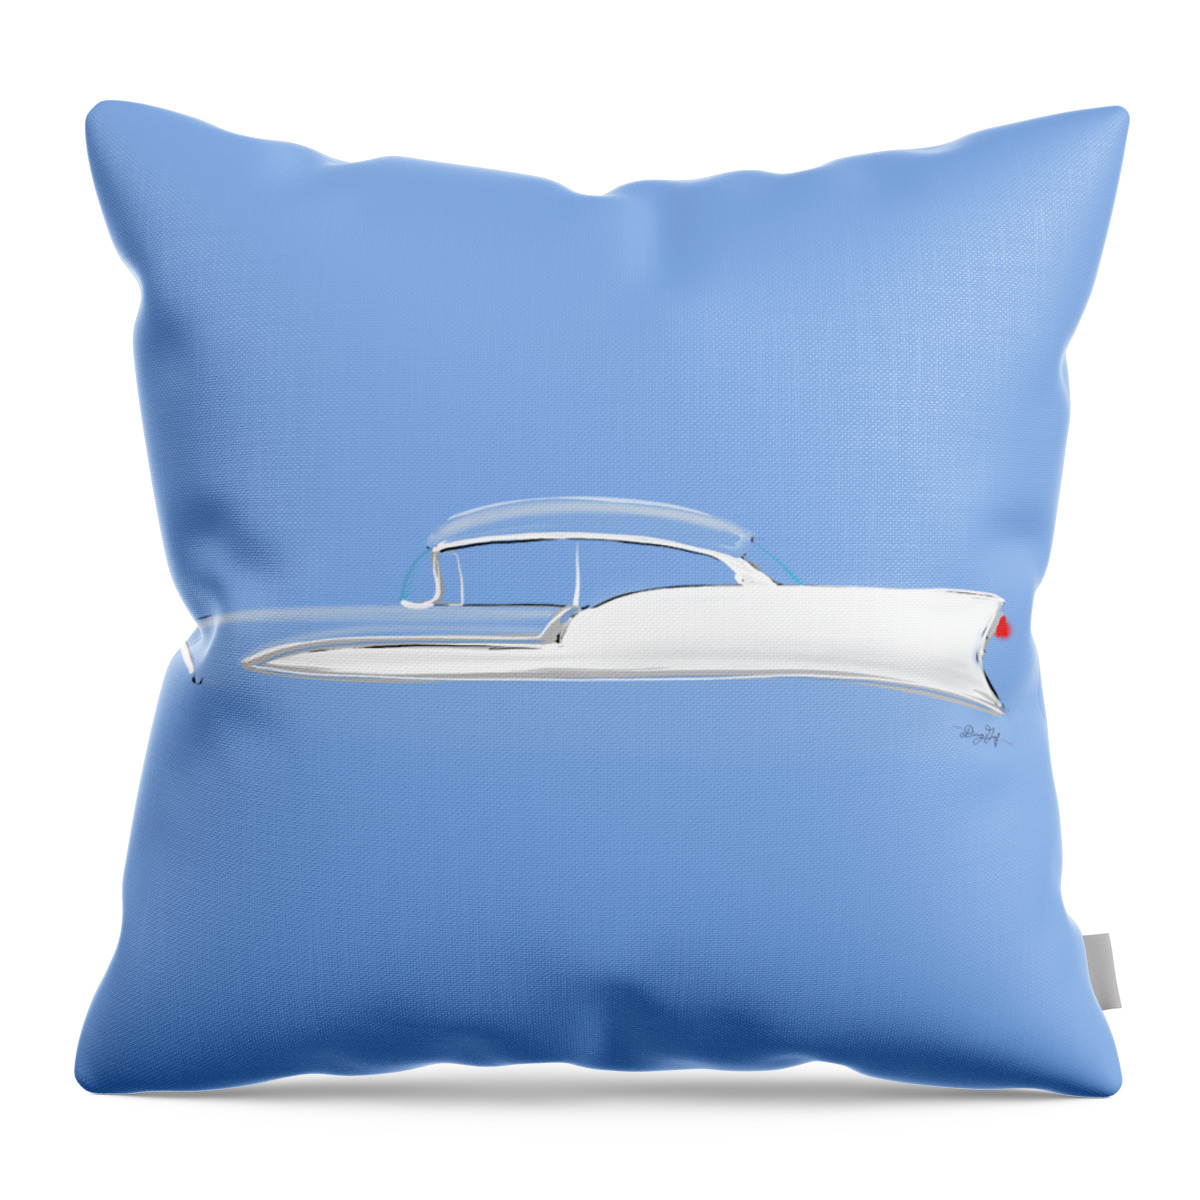 55 Throw Pillow featuring the digital art 1956 Chevy Bel Air by Doug Gist